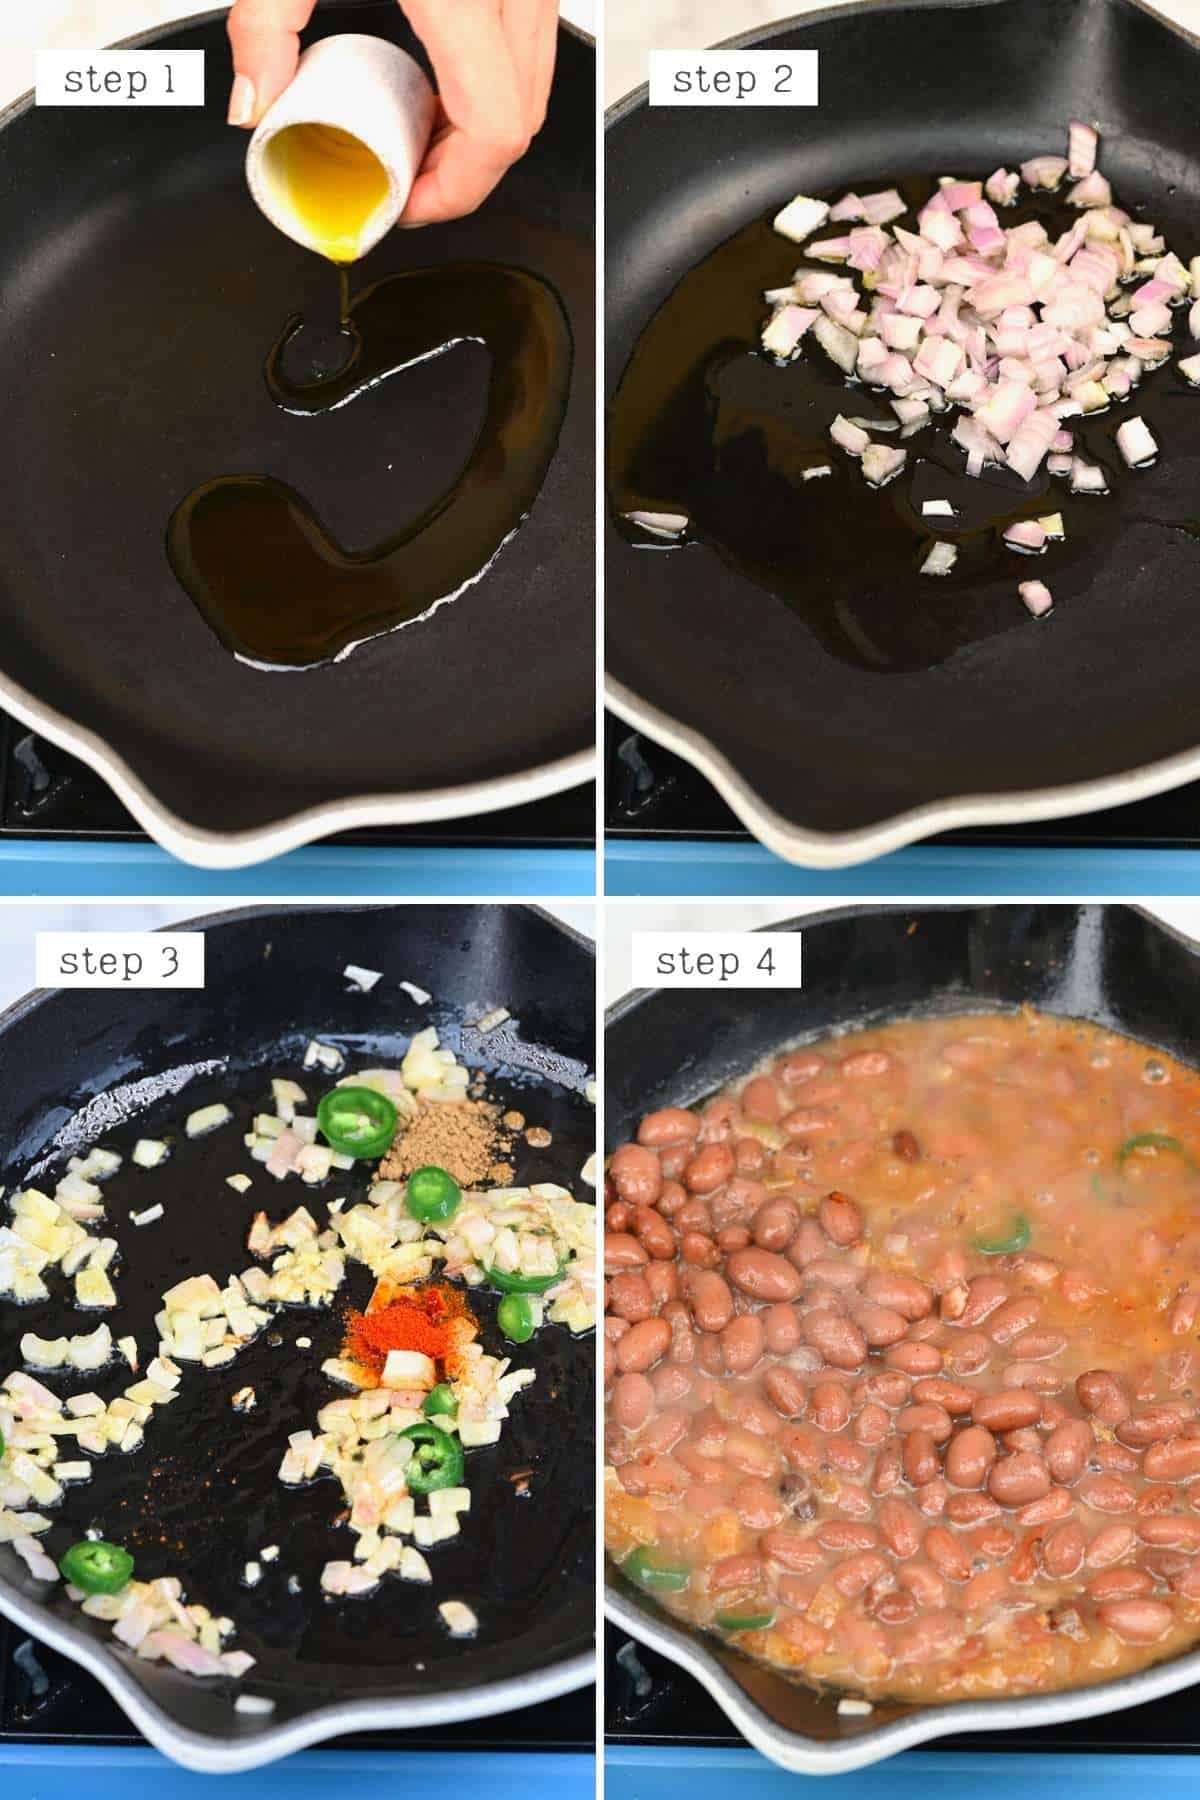 Steps for cooking refried beans (frijoles refritos)